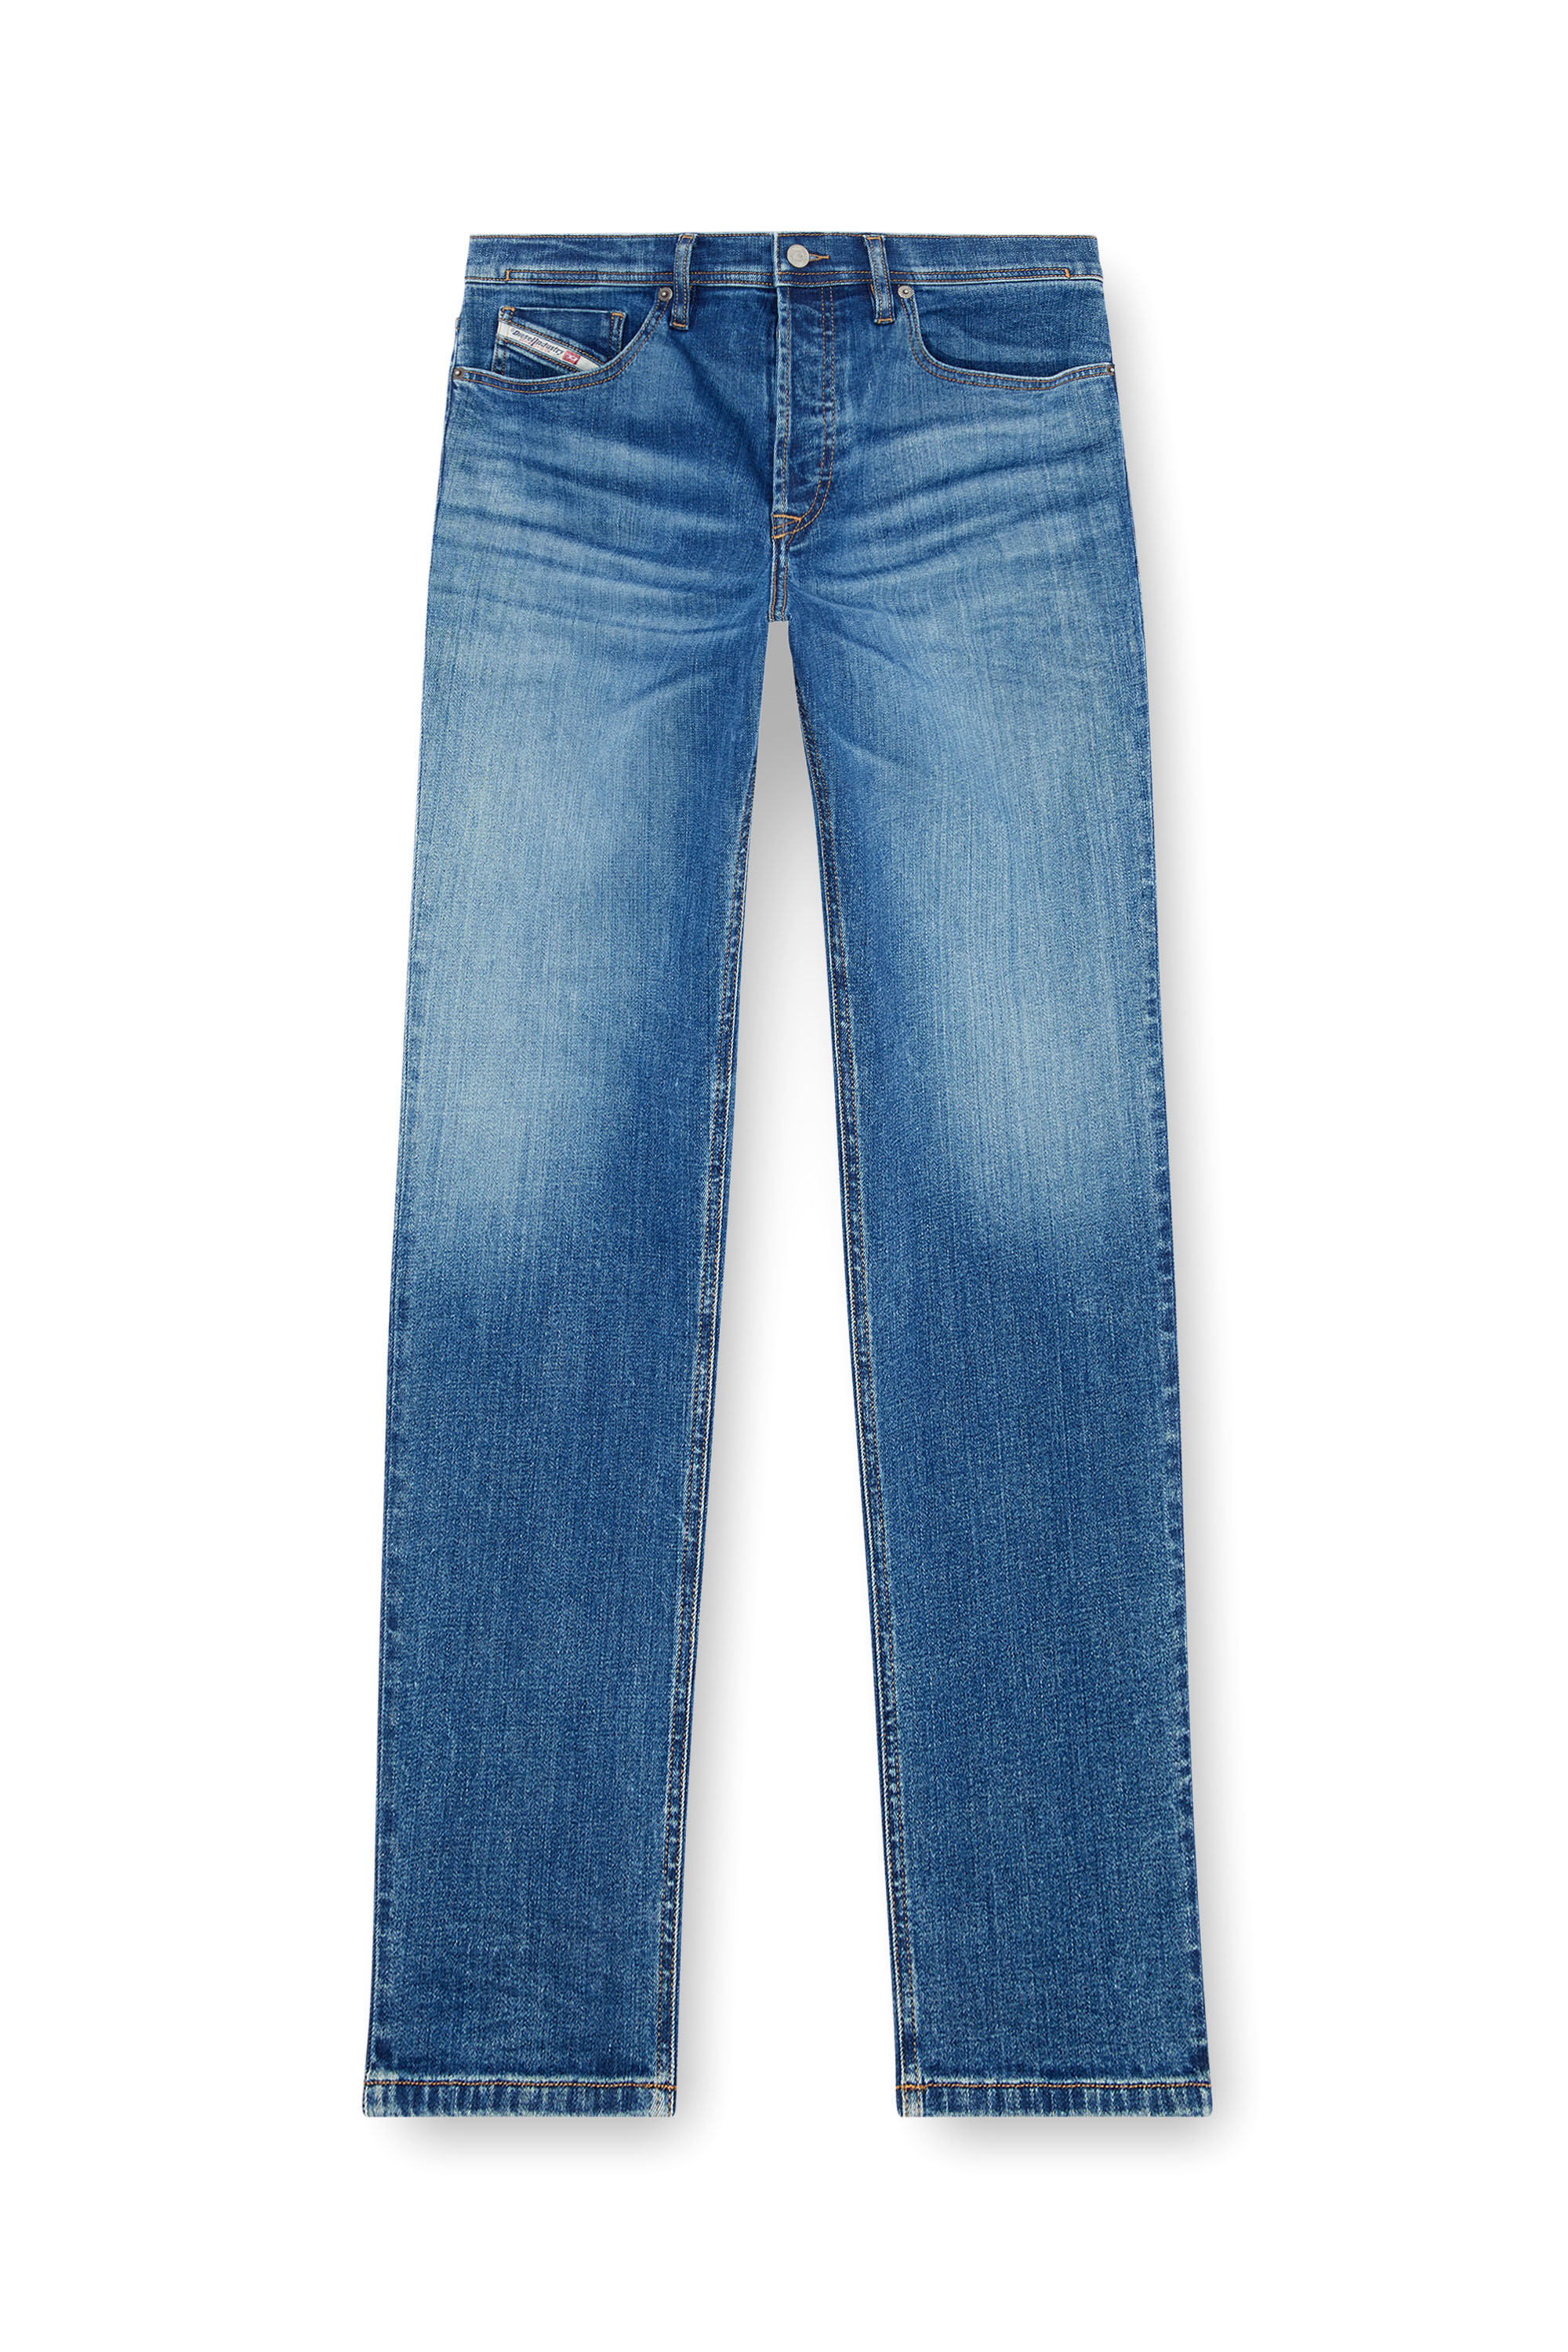 Diesel - Tapered Jeans 2023 D-Finitive 0GRDP, Hombre Tapered Jeans - 2023 D-Finitive in Azul marino - Image 3